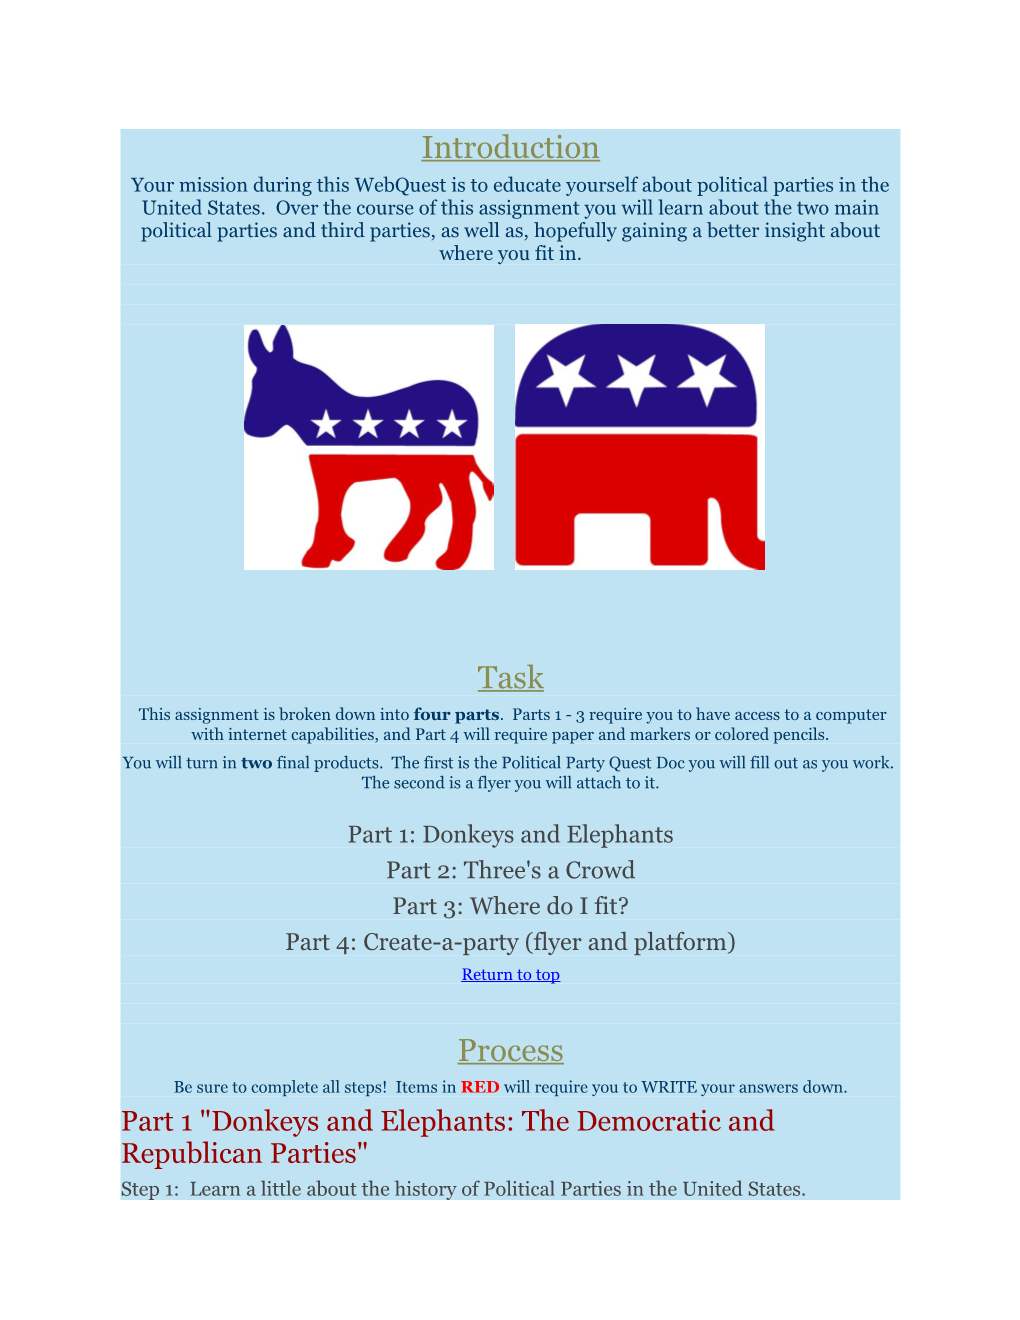 Your Mission During This Webquest Is to Educate Yourself About Political Parties in The